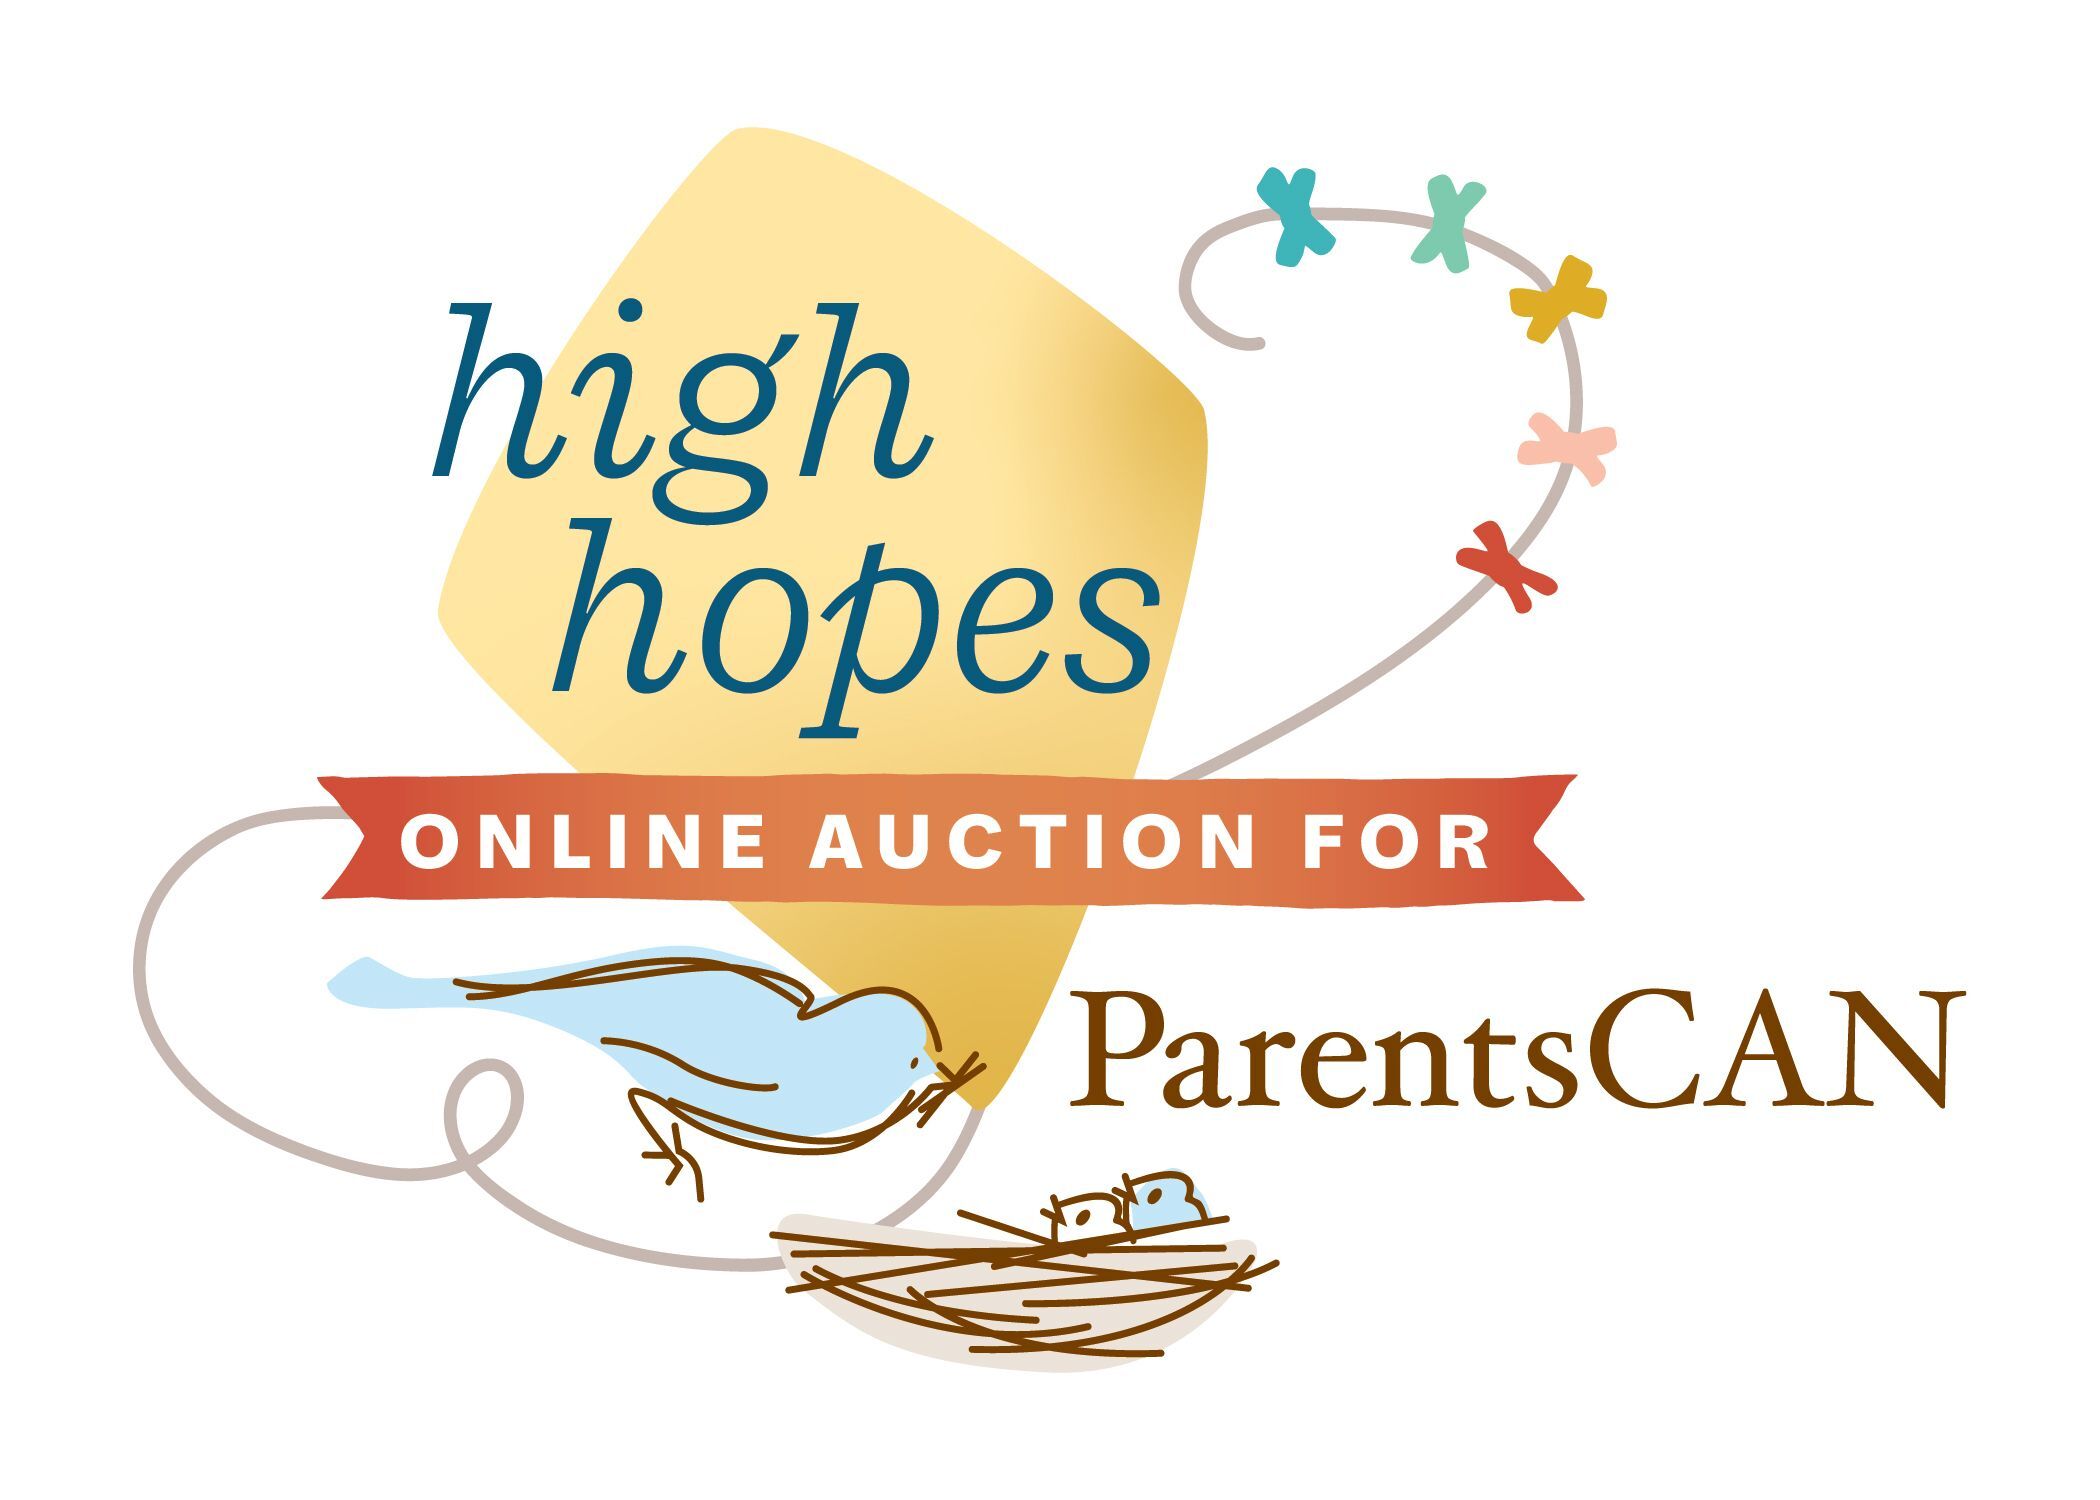 A yellow kite with a banner and the ParentsCAN logo of a bird perched over a nest with baby birds.